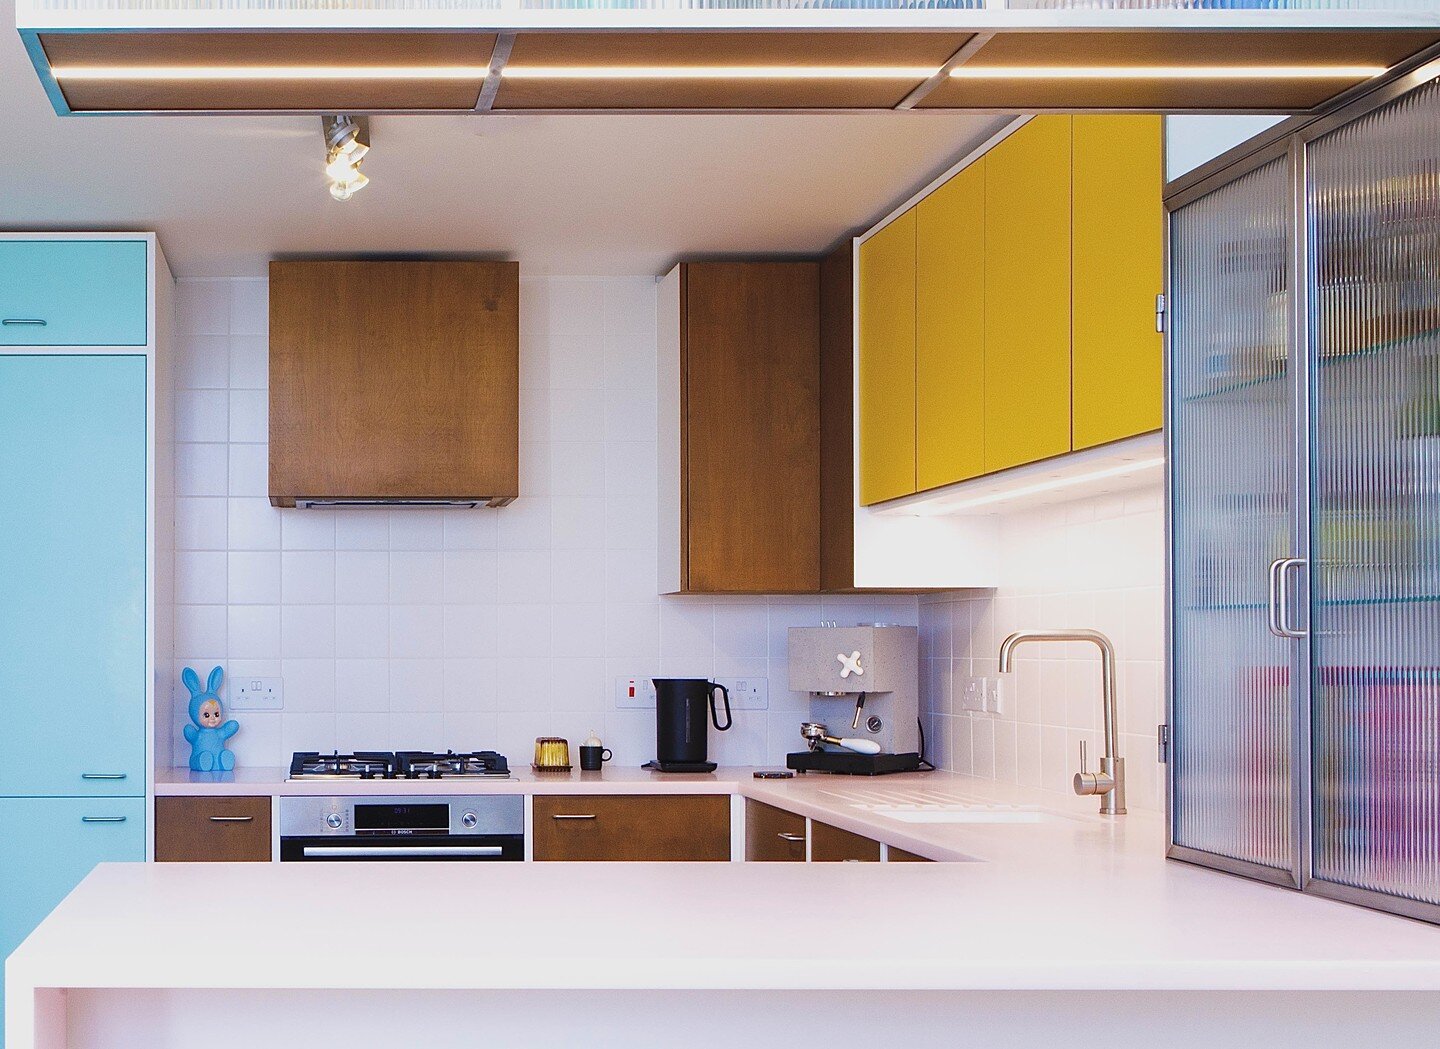 𝐌𝐞𝐫𝐫𝐲𝐰𝐨𝐨𝐝 𝐑𝐝.
It's been nearly a year since we fitted this kitchen! Time flies. 
Our client had a really clear vision for the design - strong mid-century influence from the stained birch plywood and yellow Formica cupboard fronts - the tra